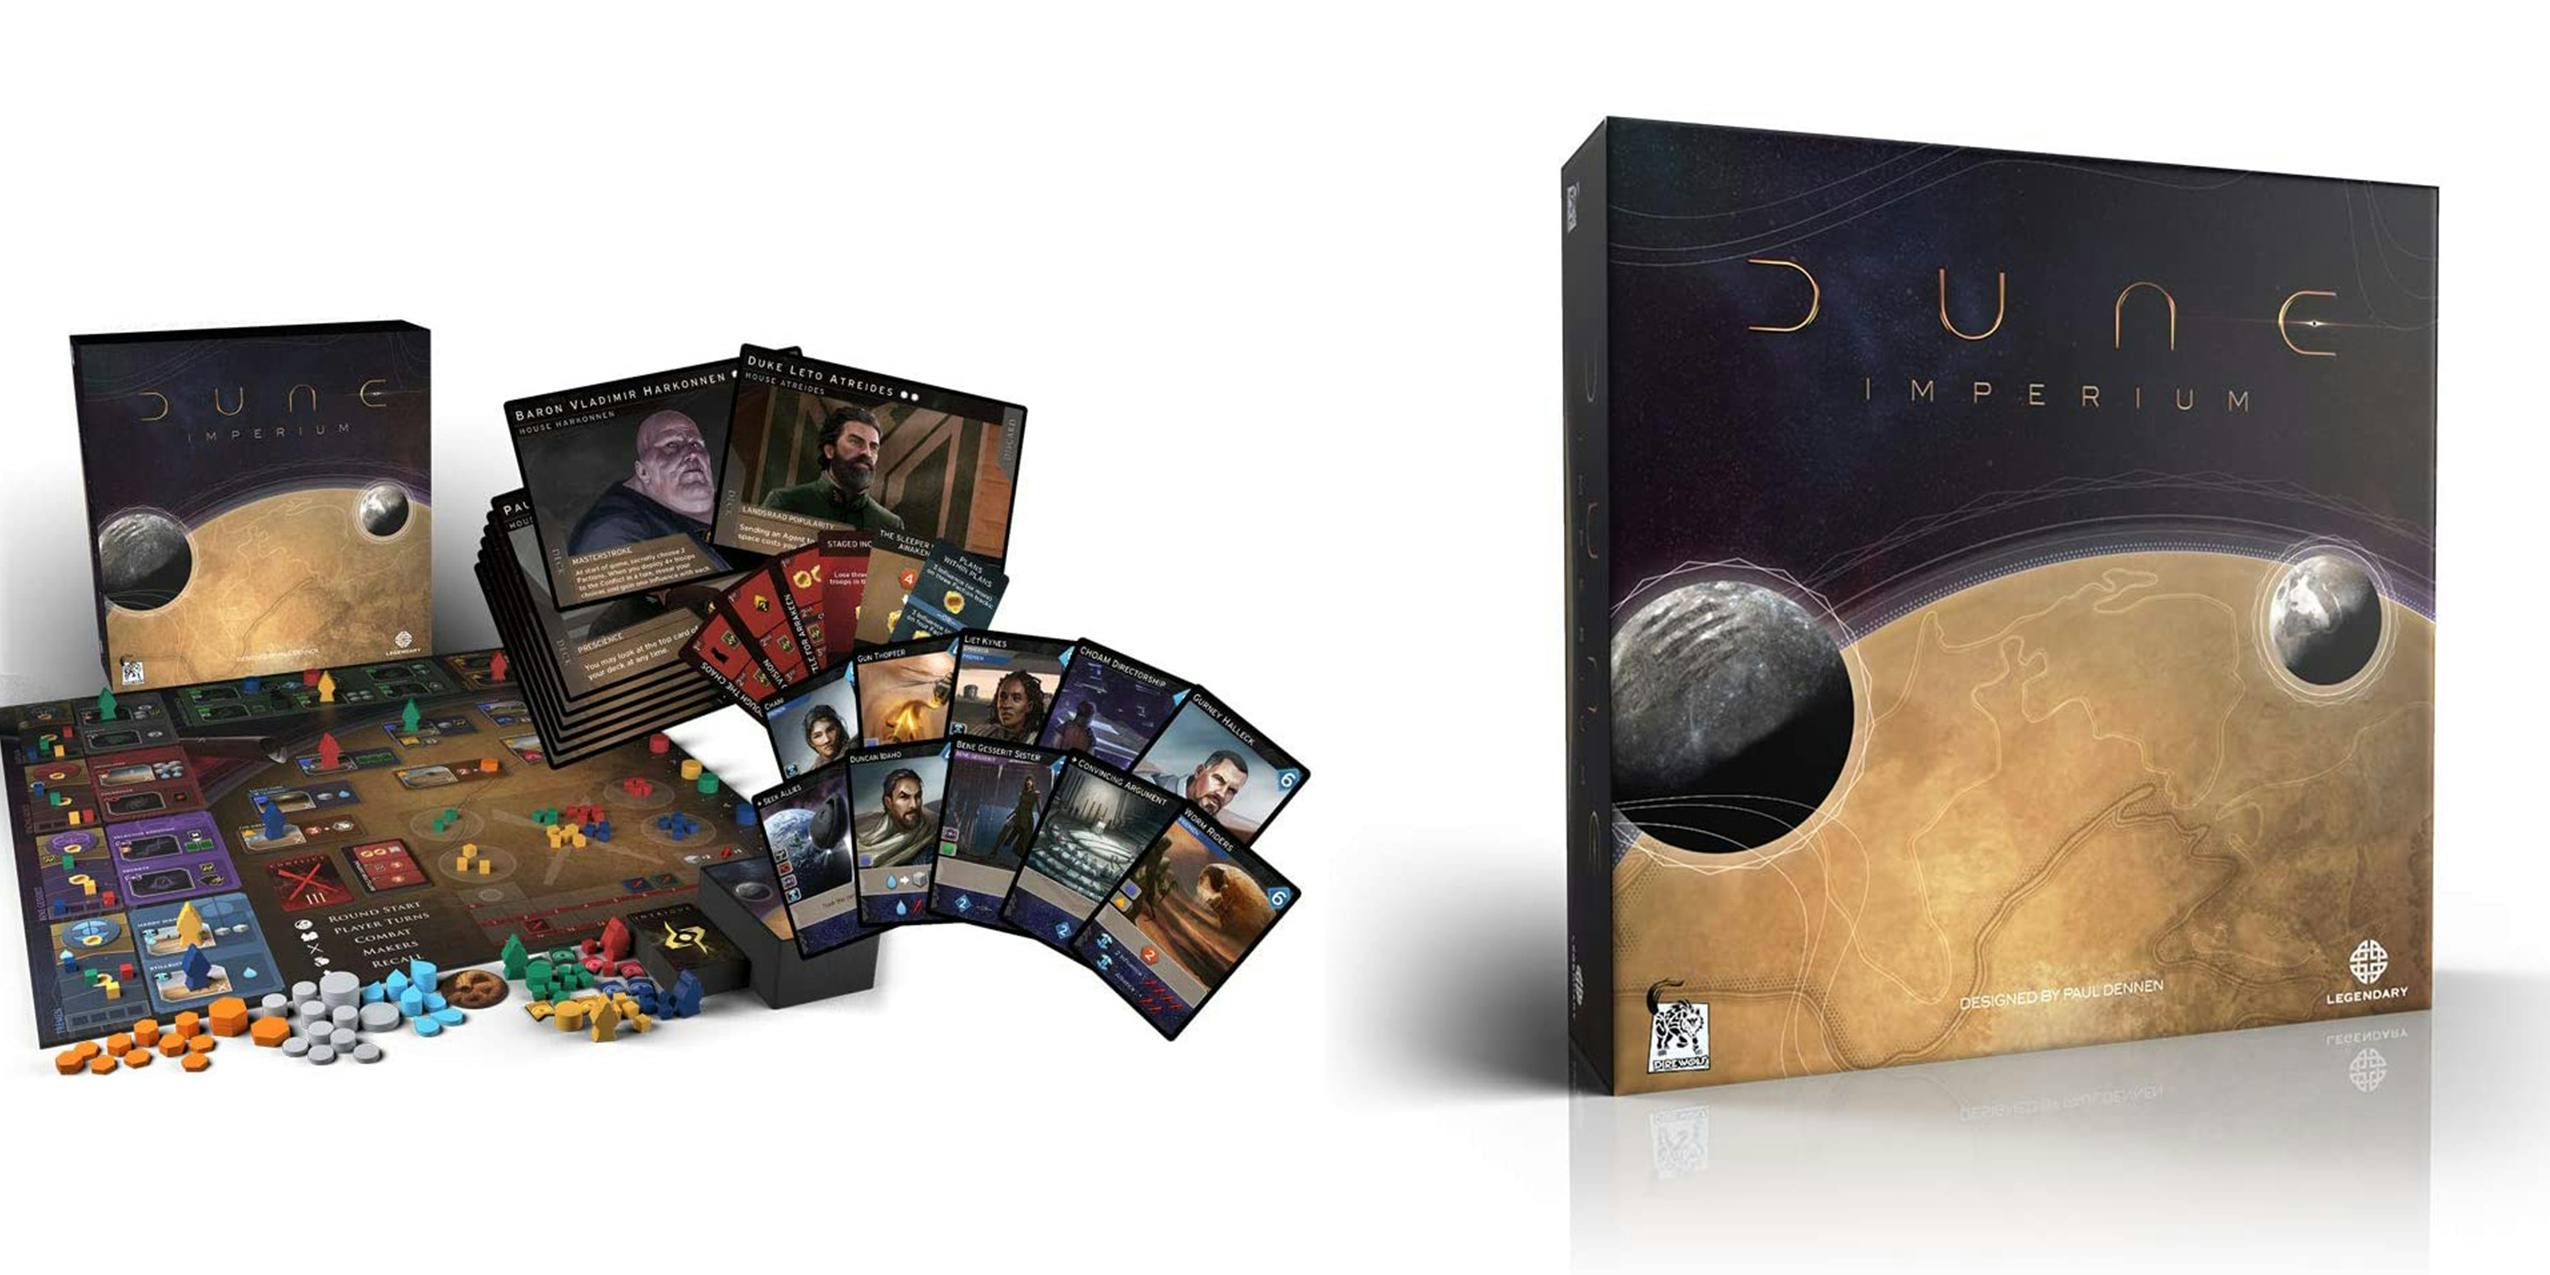 The complete contents of the Dune: Imperium board game and its box.